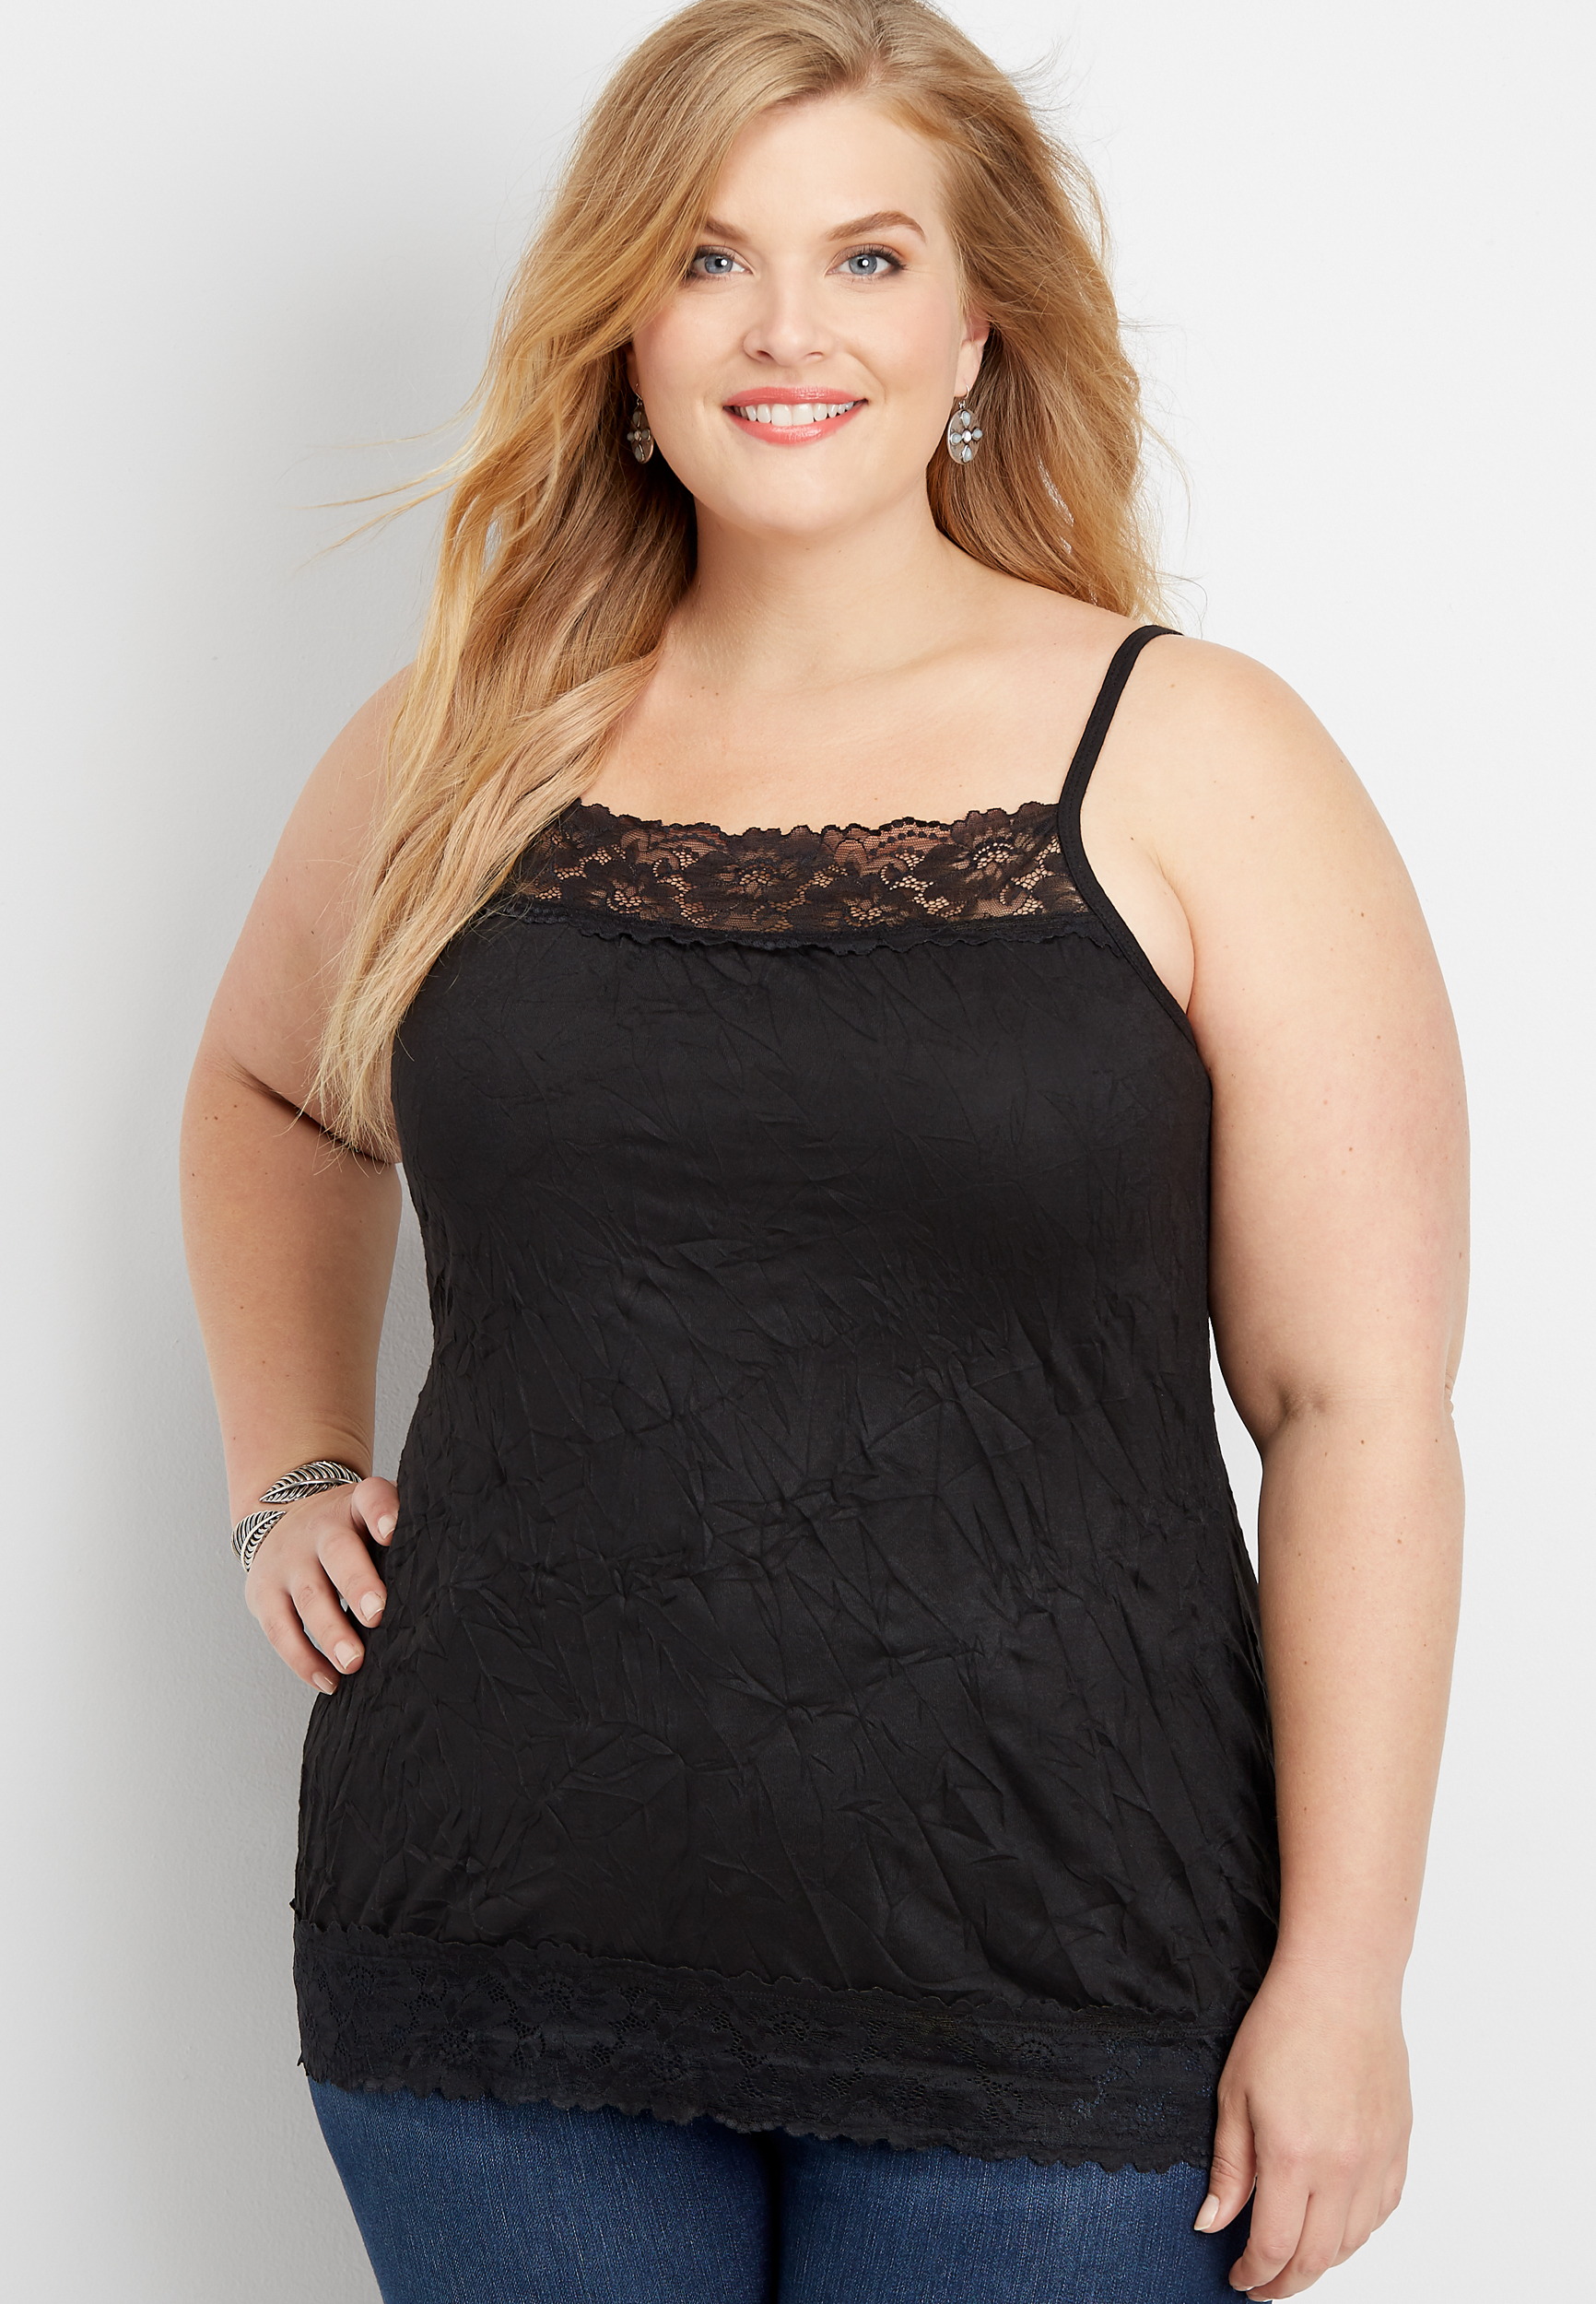 OYOANGLE- Wome's Plus Size Sheer Mesh Round Neck Tank Tops